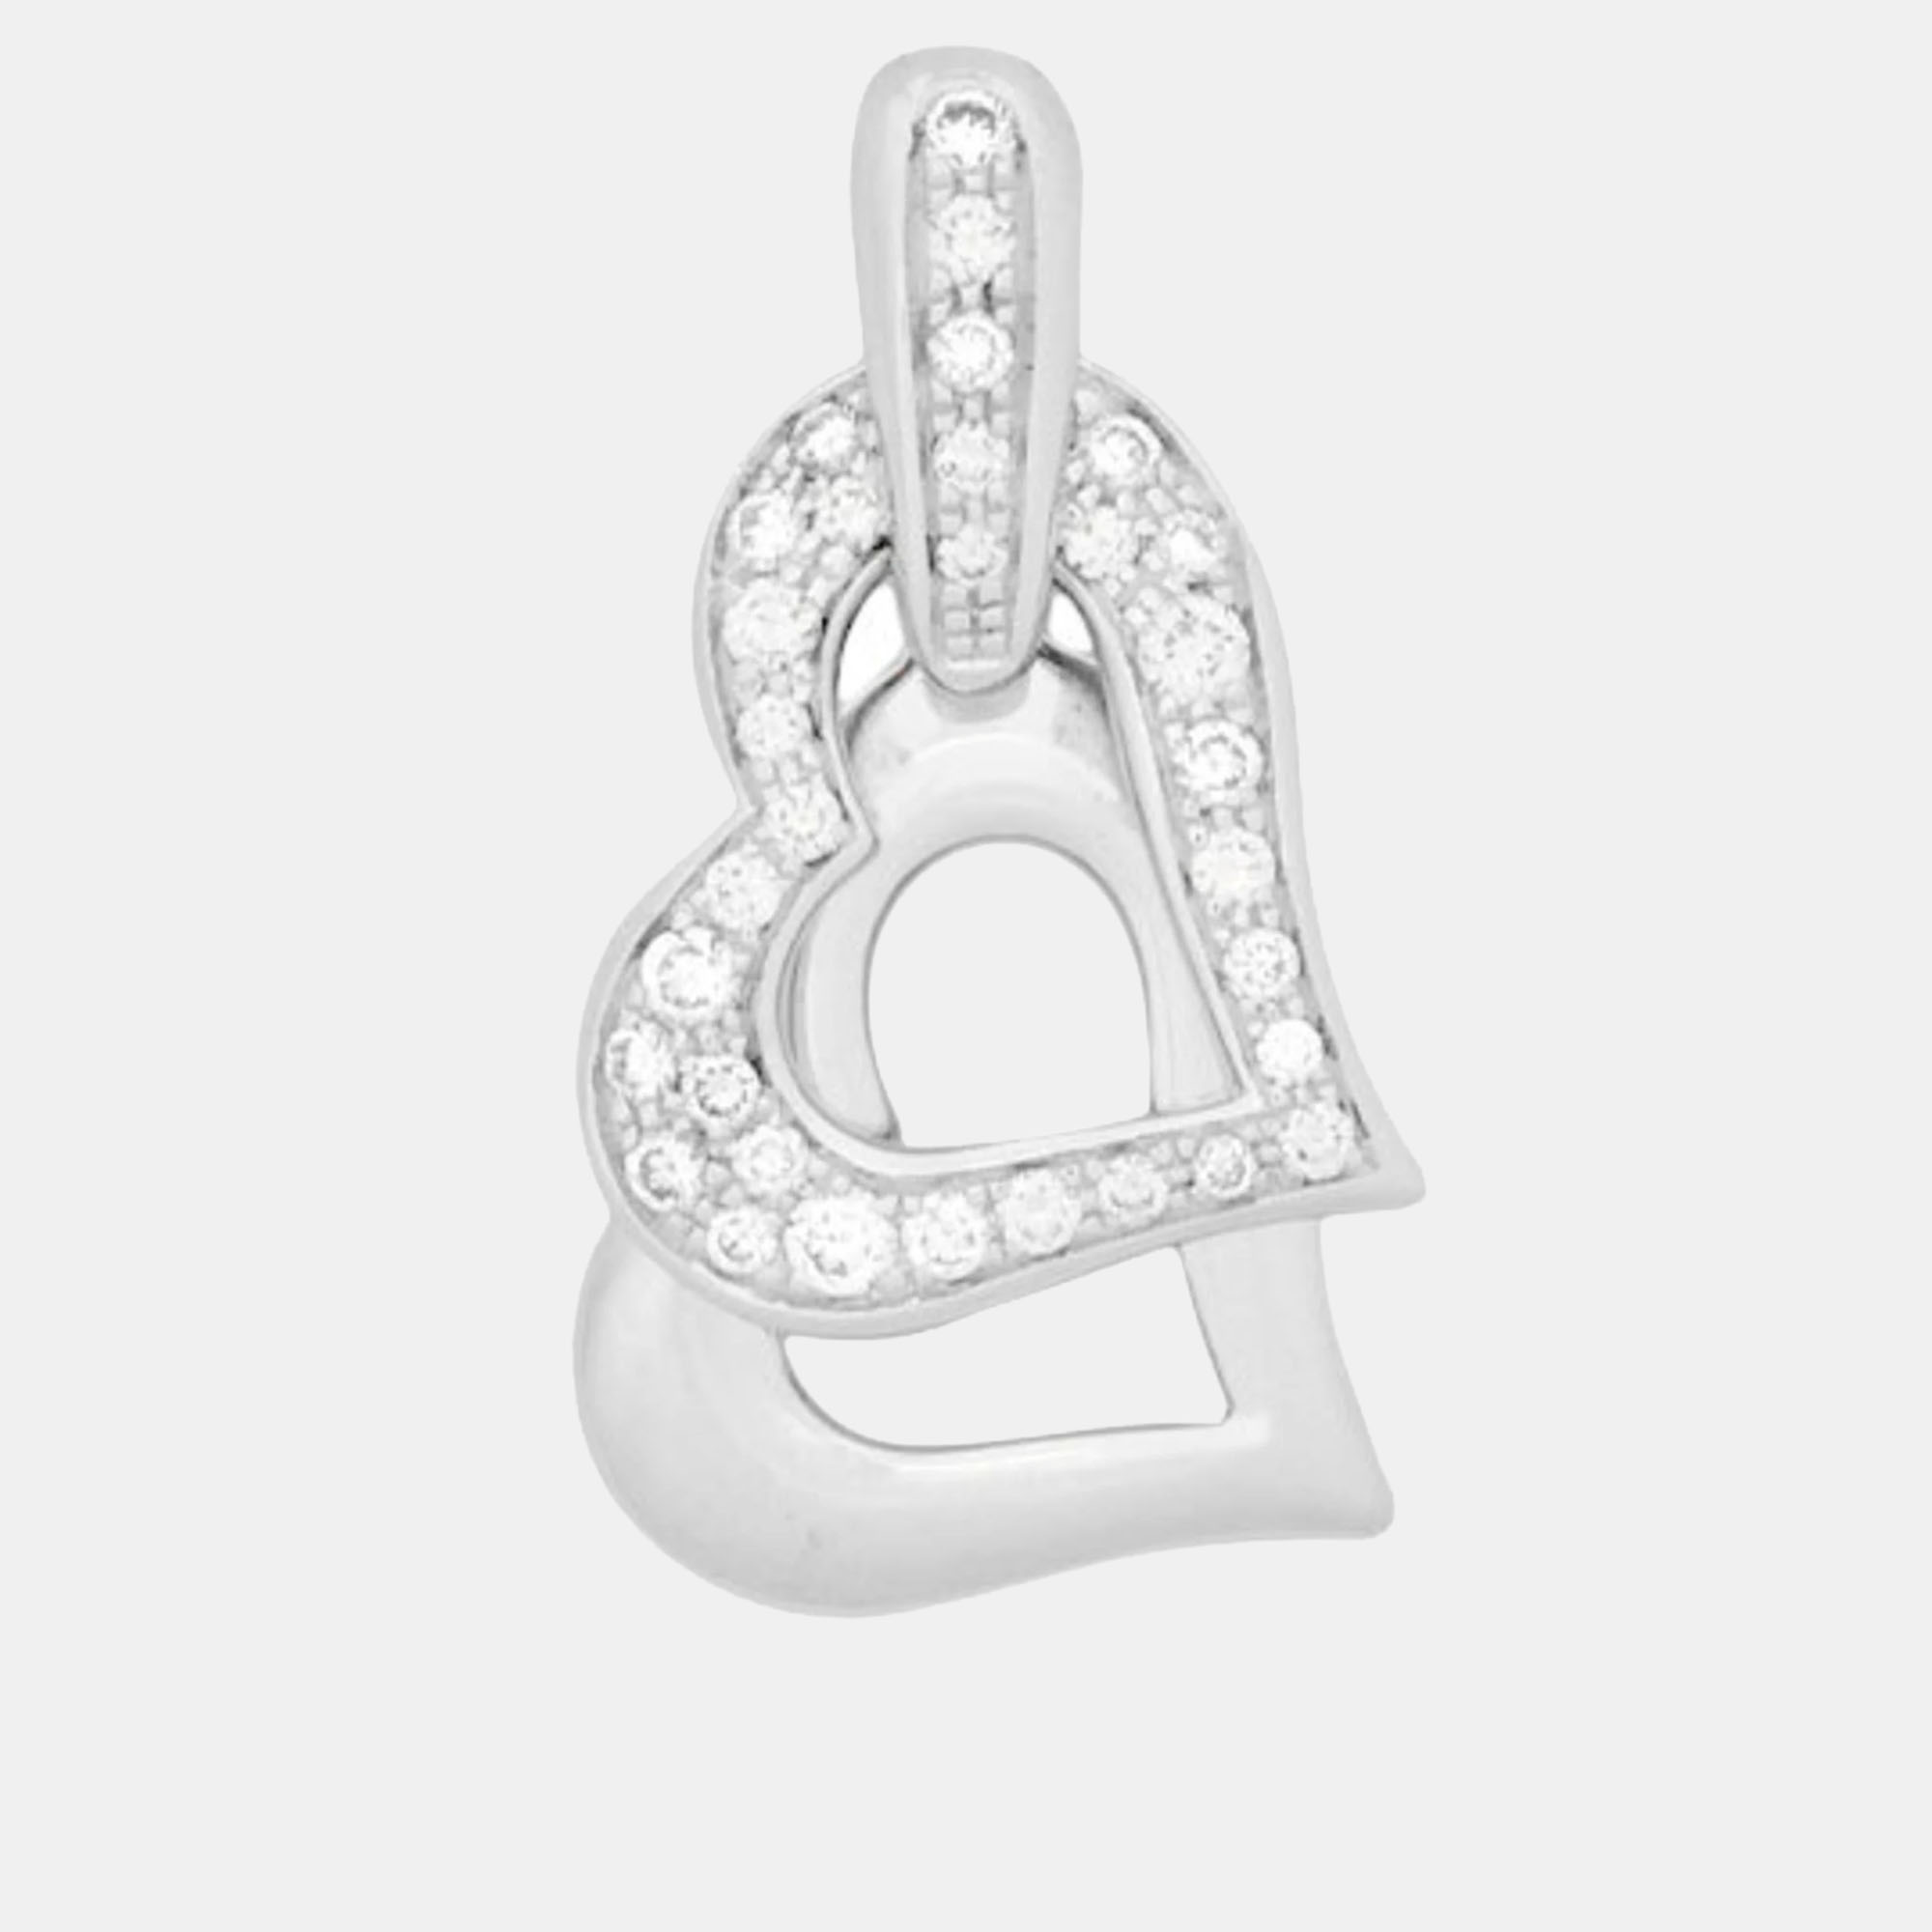 Piaget 18k white gold and diamond heart pendant necklace